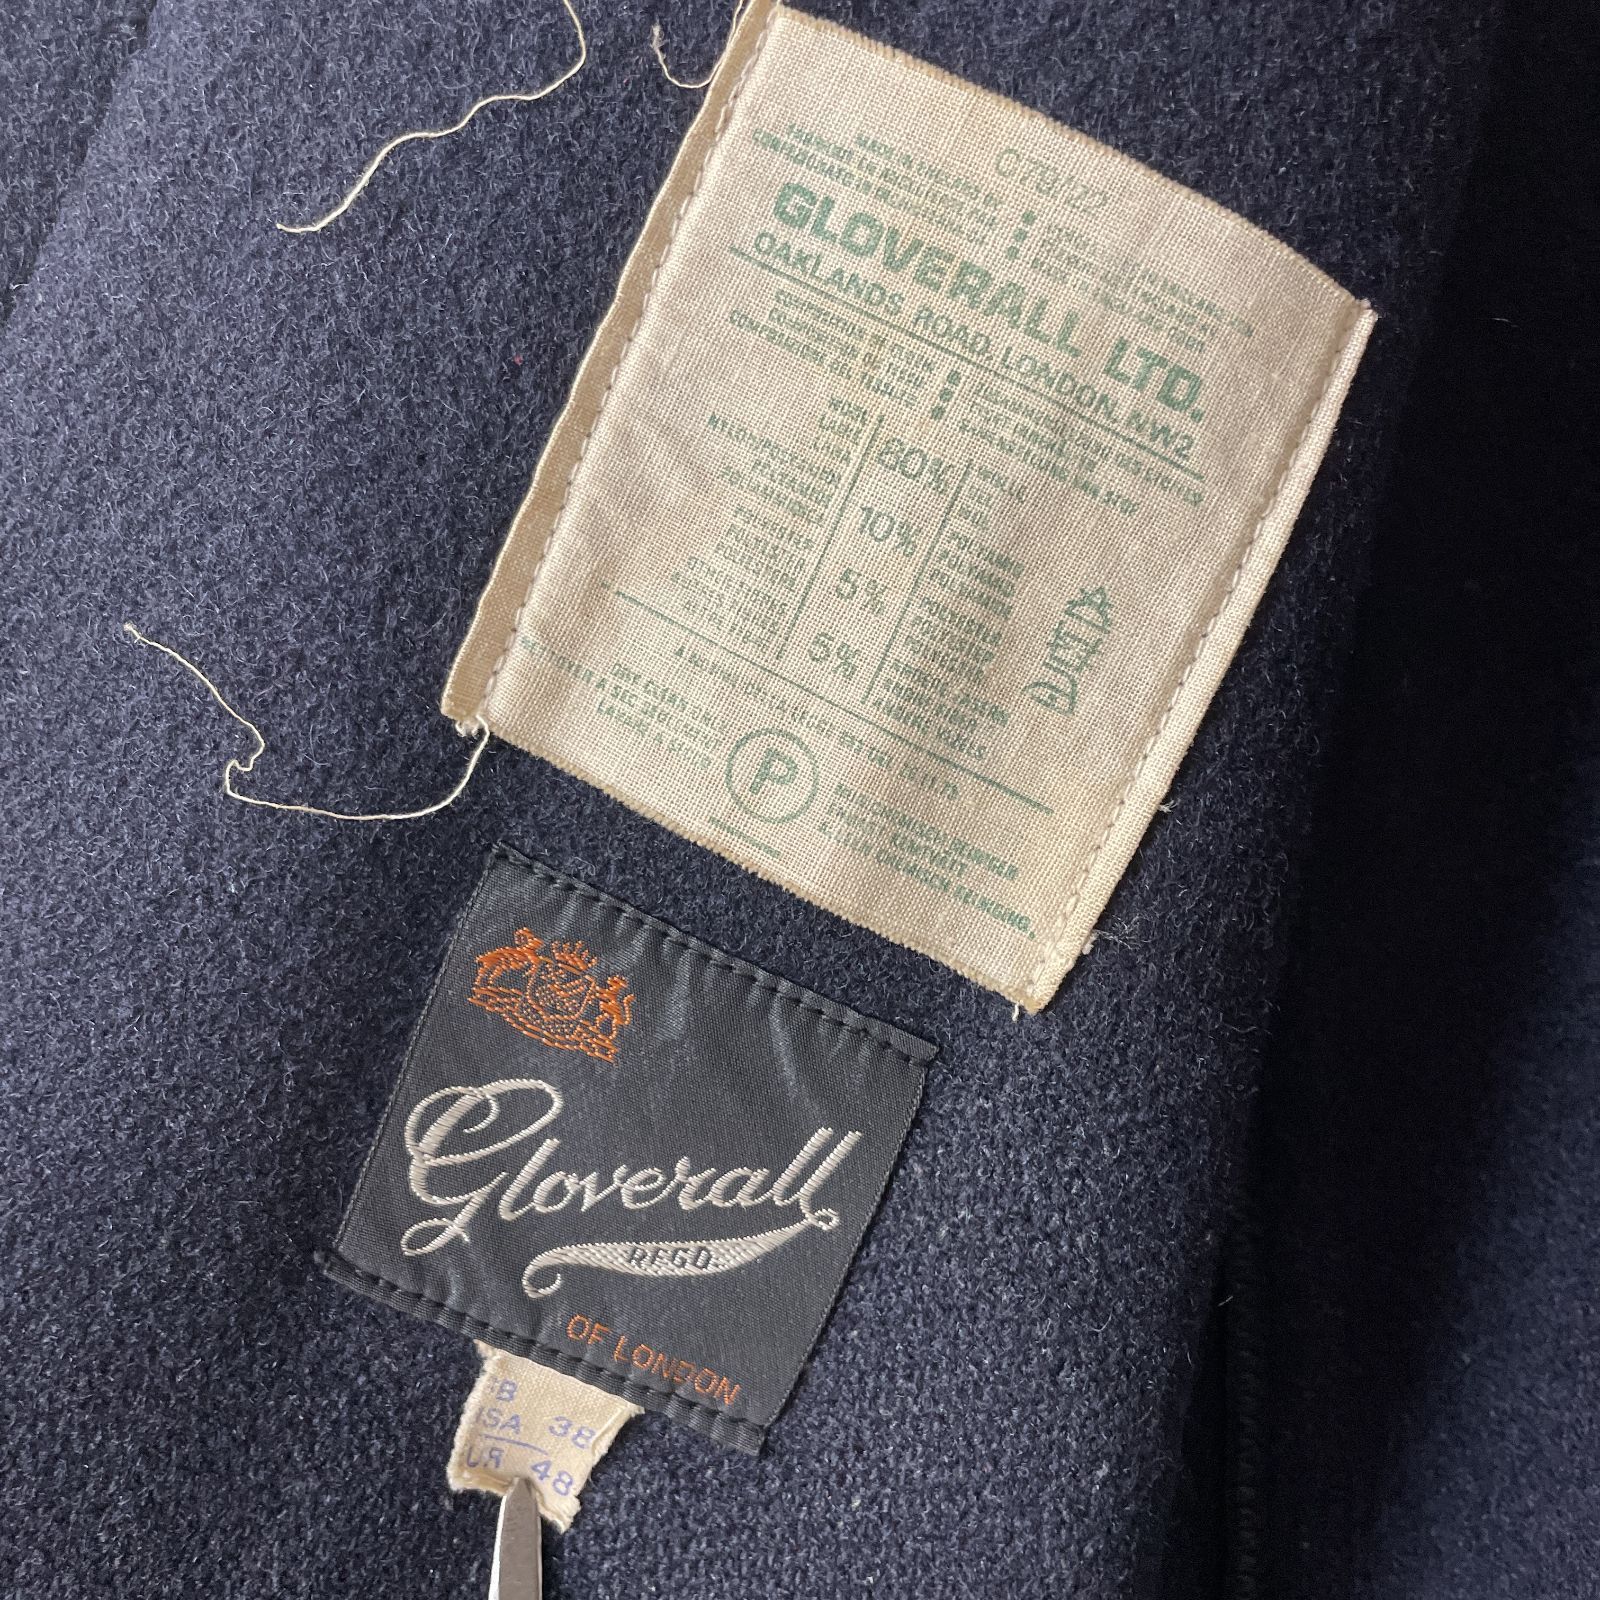 60s-70s】Gloverall size/48 (r) ヴィンテージ古着 英国製